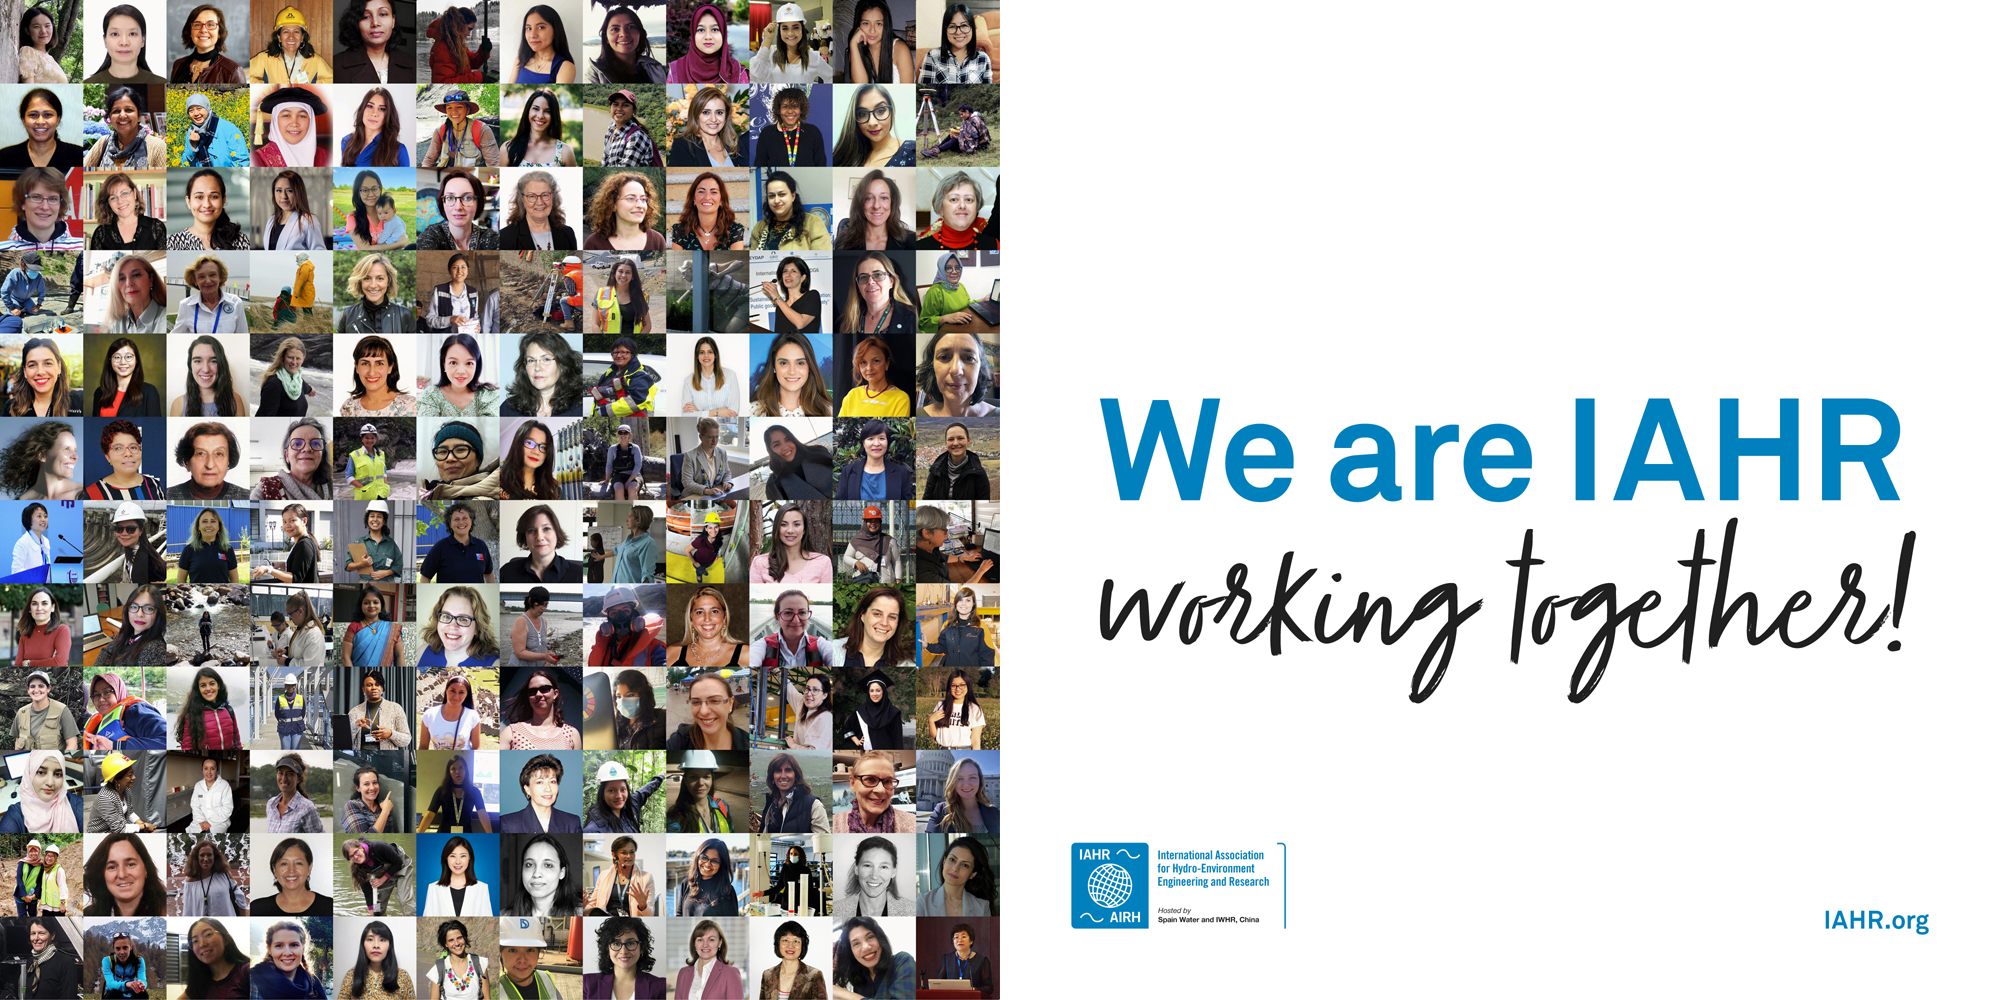 Download: We are IAHR working together! Banner